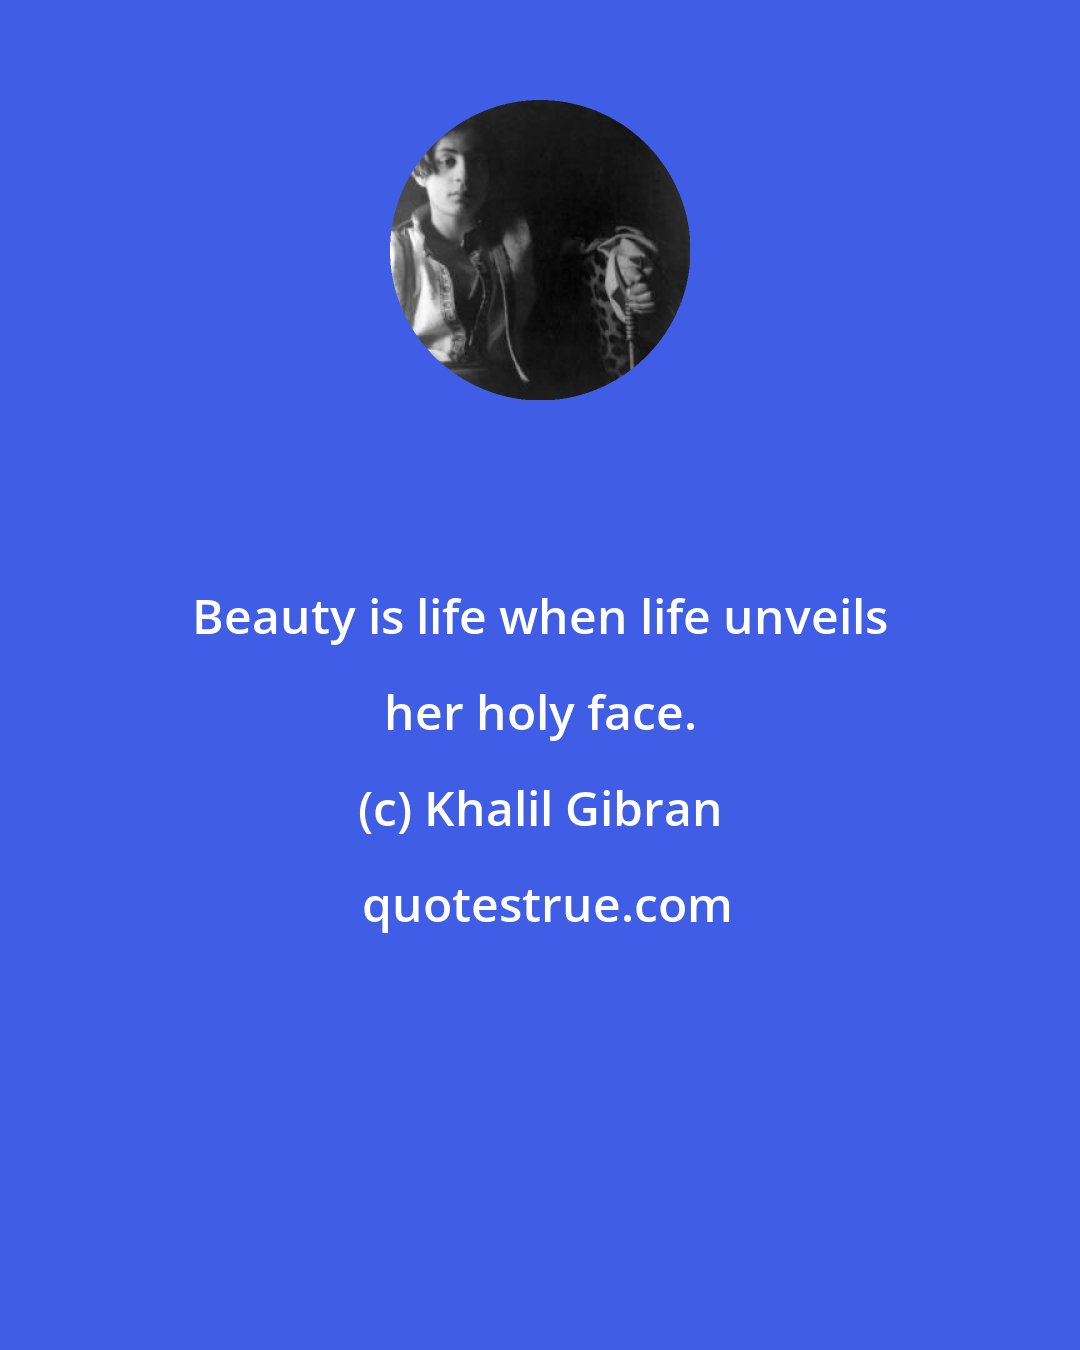 Khalil Gibran: Beauty is life when life unveils her holy face.